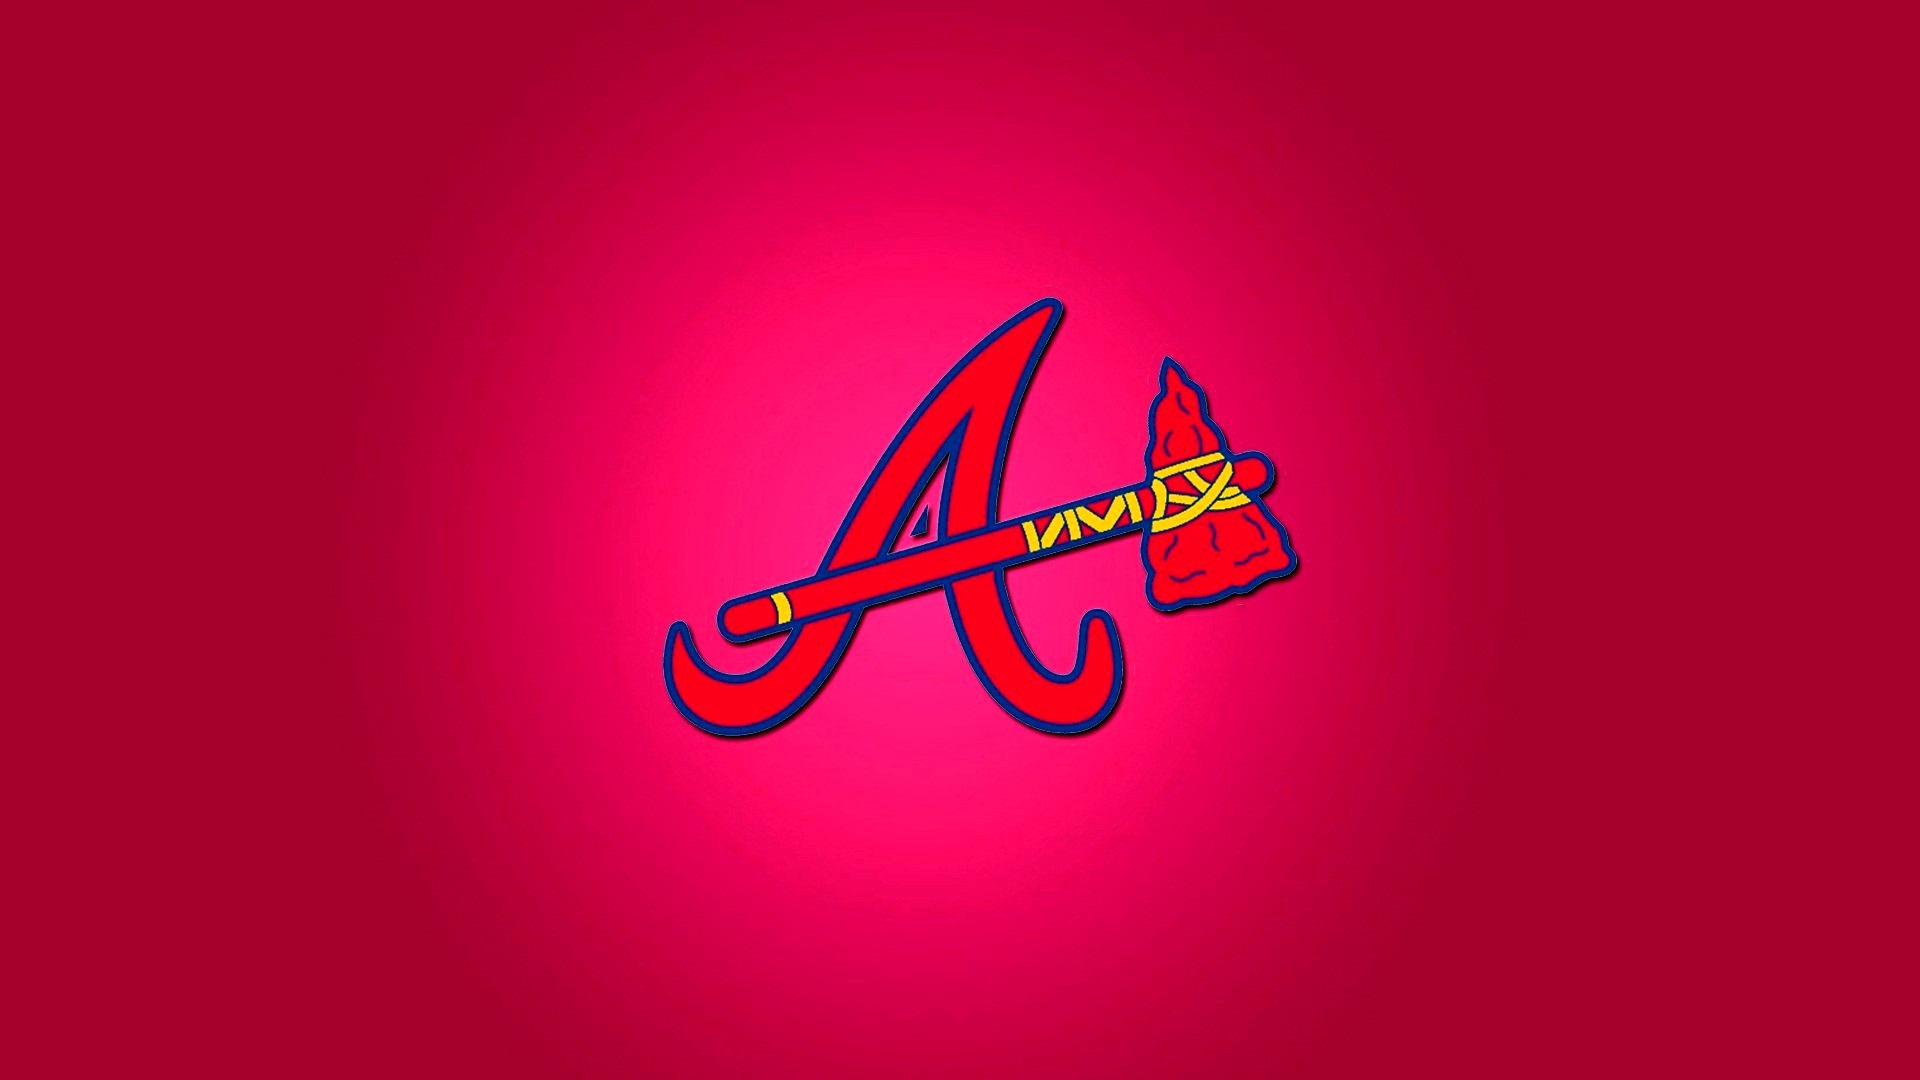 Atlanta Braves For Desktop Wallpaper With high-resolution 1920X1080 pixel. You can use this wallpaper for Mac Desktop Wallpaper, Laptop Screensavers, Android Wallpapers, Tablet or iPhone Home Screen and another mobile phone device